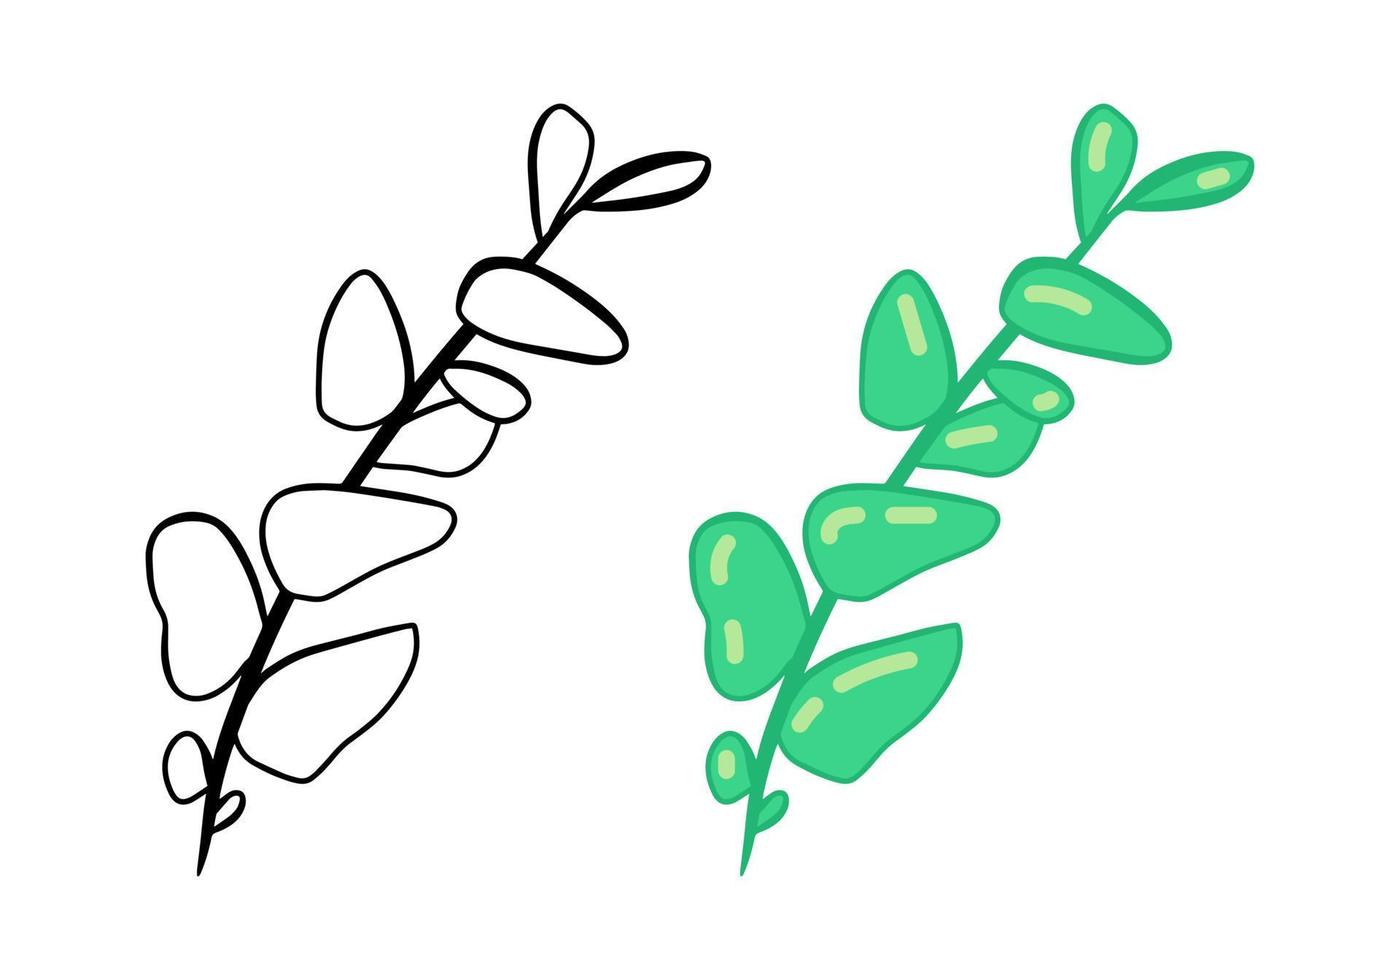 Herbal doodle eucalyptus branch icon, simple hand drawn sketch line art style, black and green branch botany set. Beauty elegant logo design element. Graphic isolated symbol drawing. vector